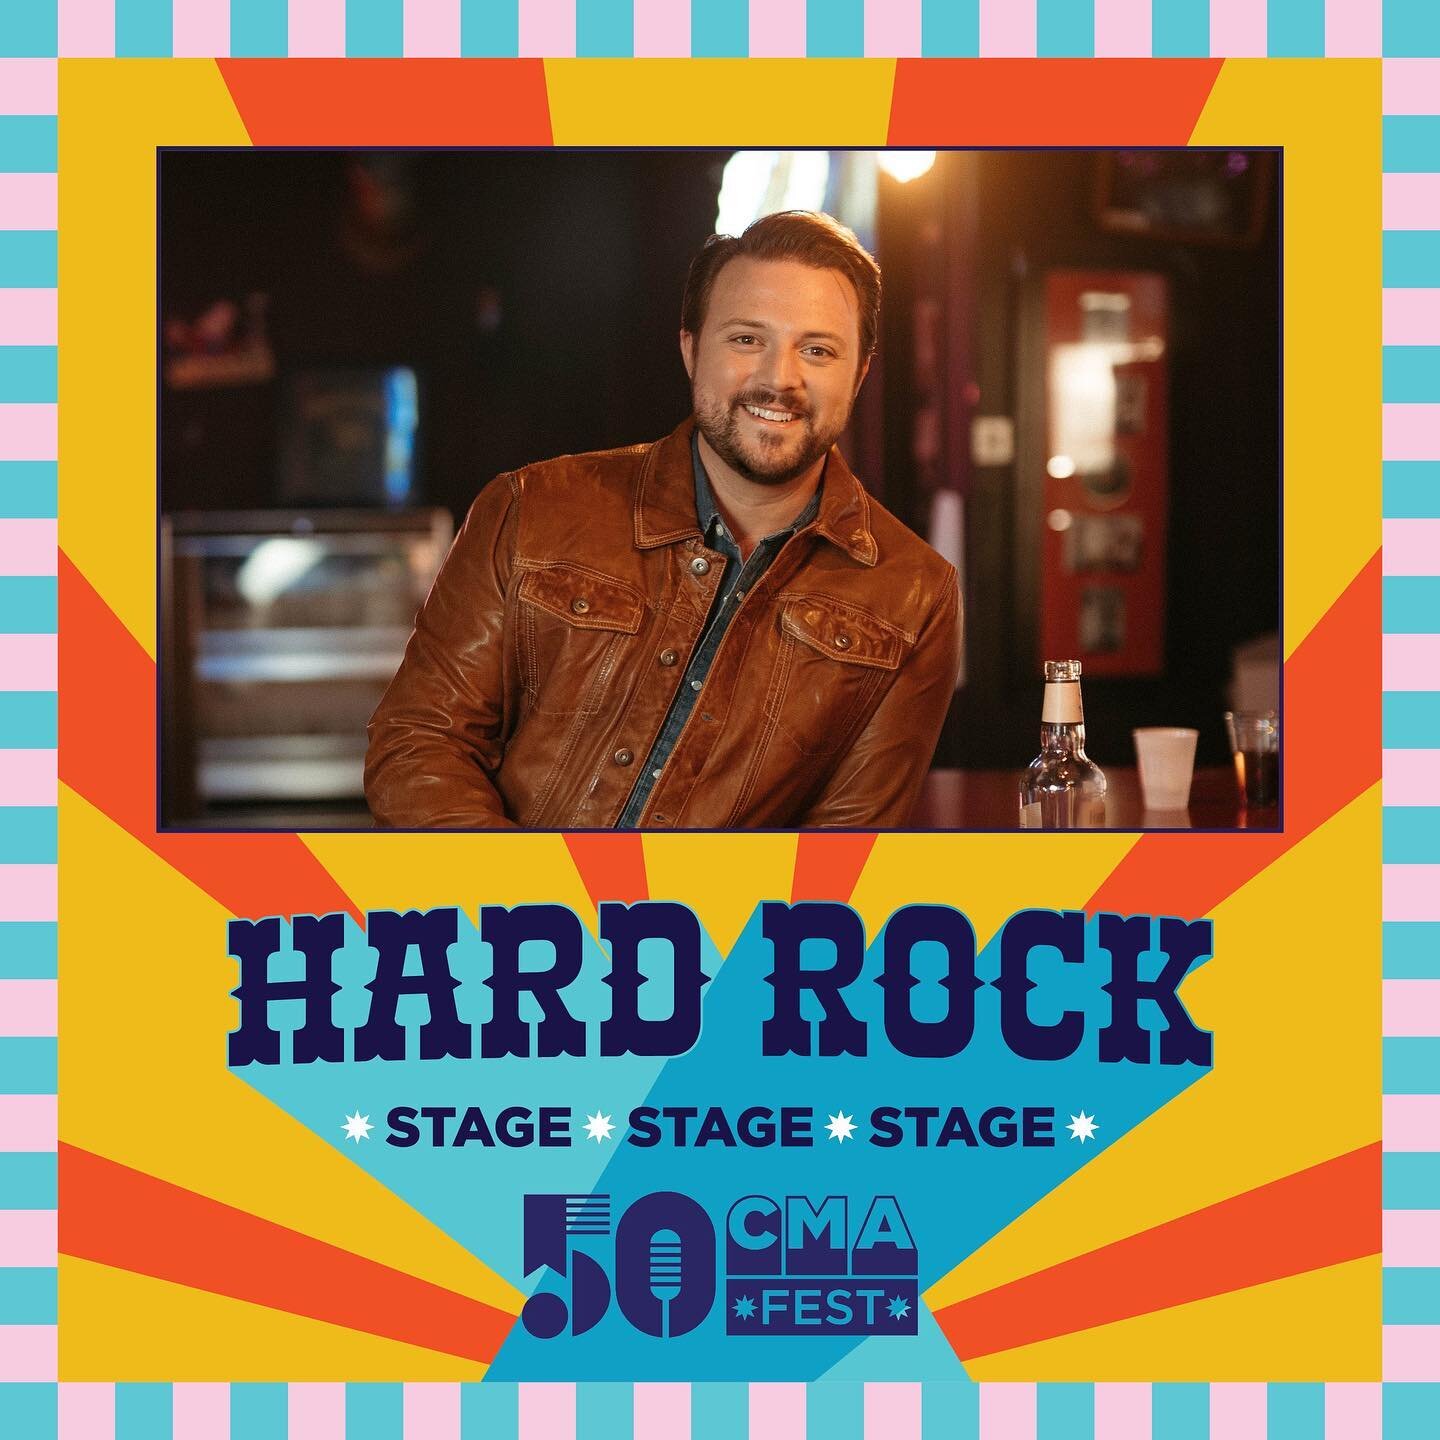 #CMAfest here we come!! Y&rsquo;all come find me at the Hard Rock Stage on Thursday, June 8th at 3:35pm! The whole festival supports the @cmafoundation &amp; their mission to shape the next generation through music education. Come on out and support 